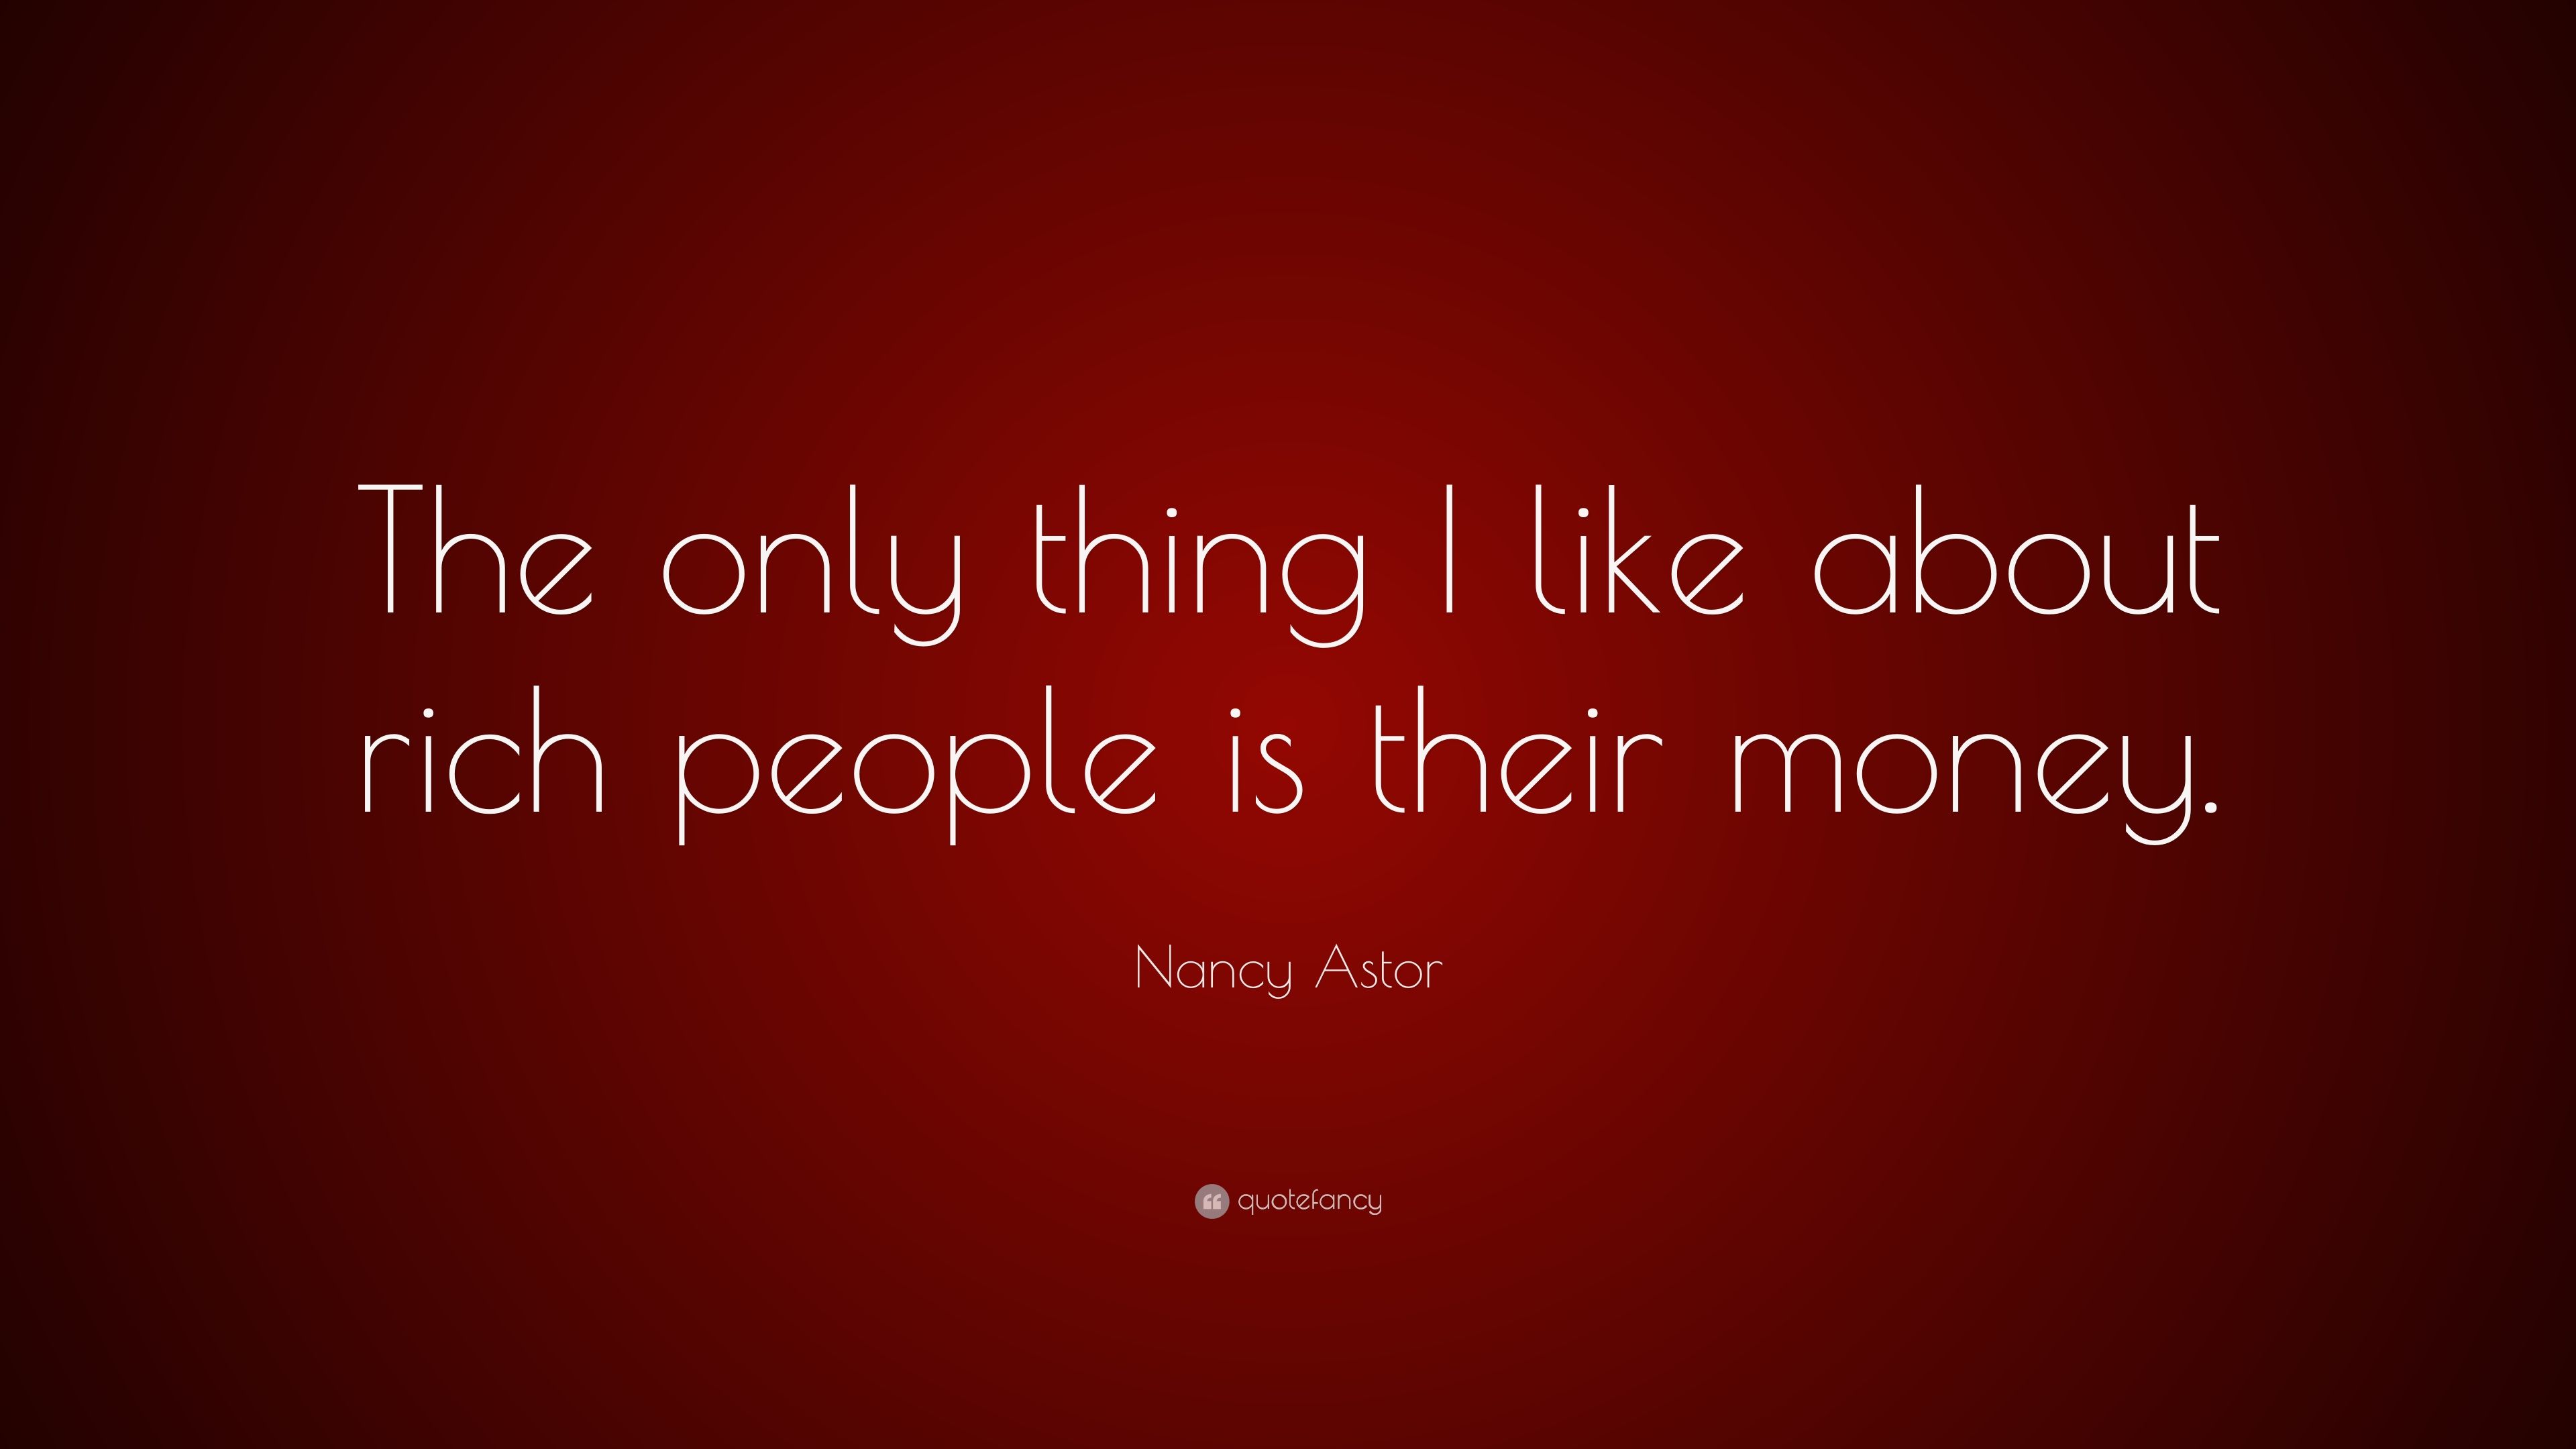 Nancy Astor Quote: “The only thing I like about rich people is